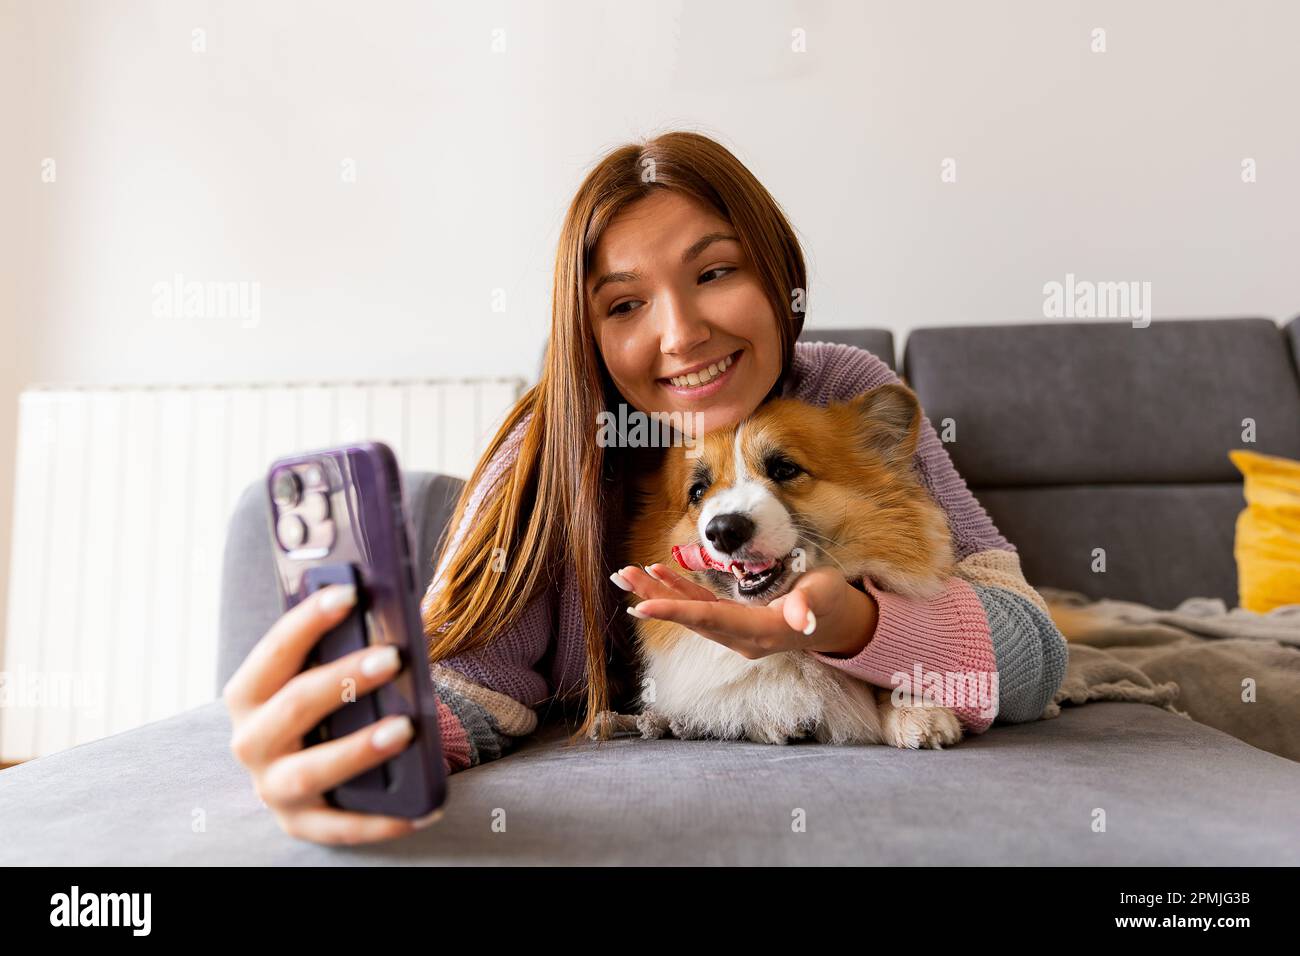 a young girl with a corgi dog and taking selfie with pet on smartphone camera. Concept stay at home, friendship with dog, taking picture. Stock Photo